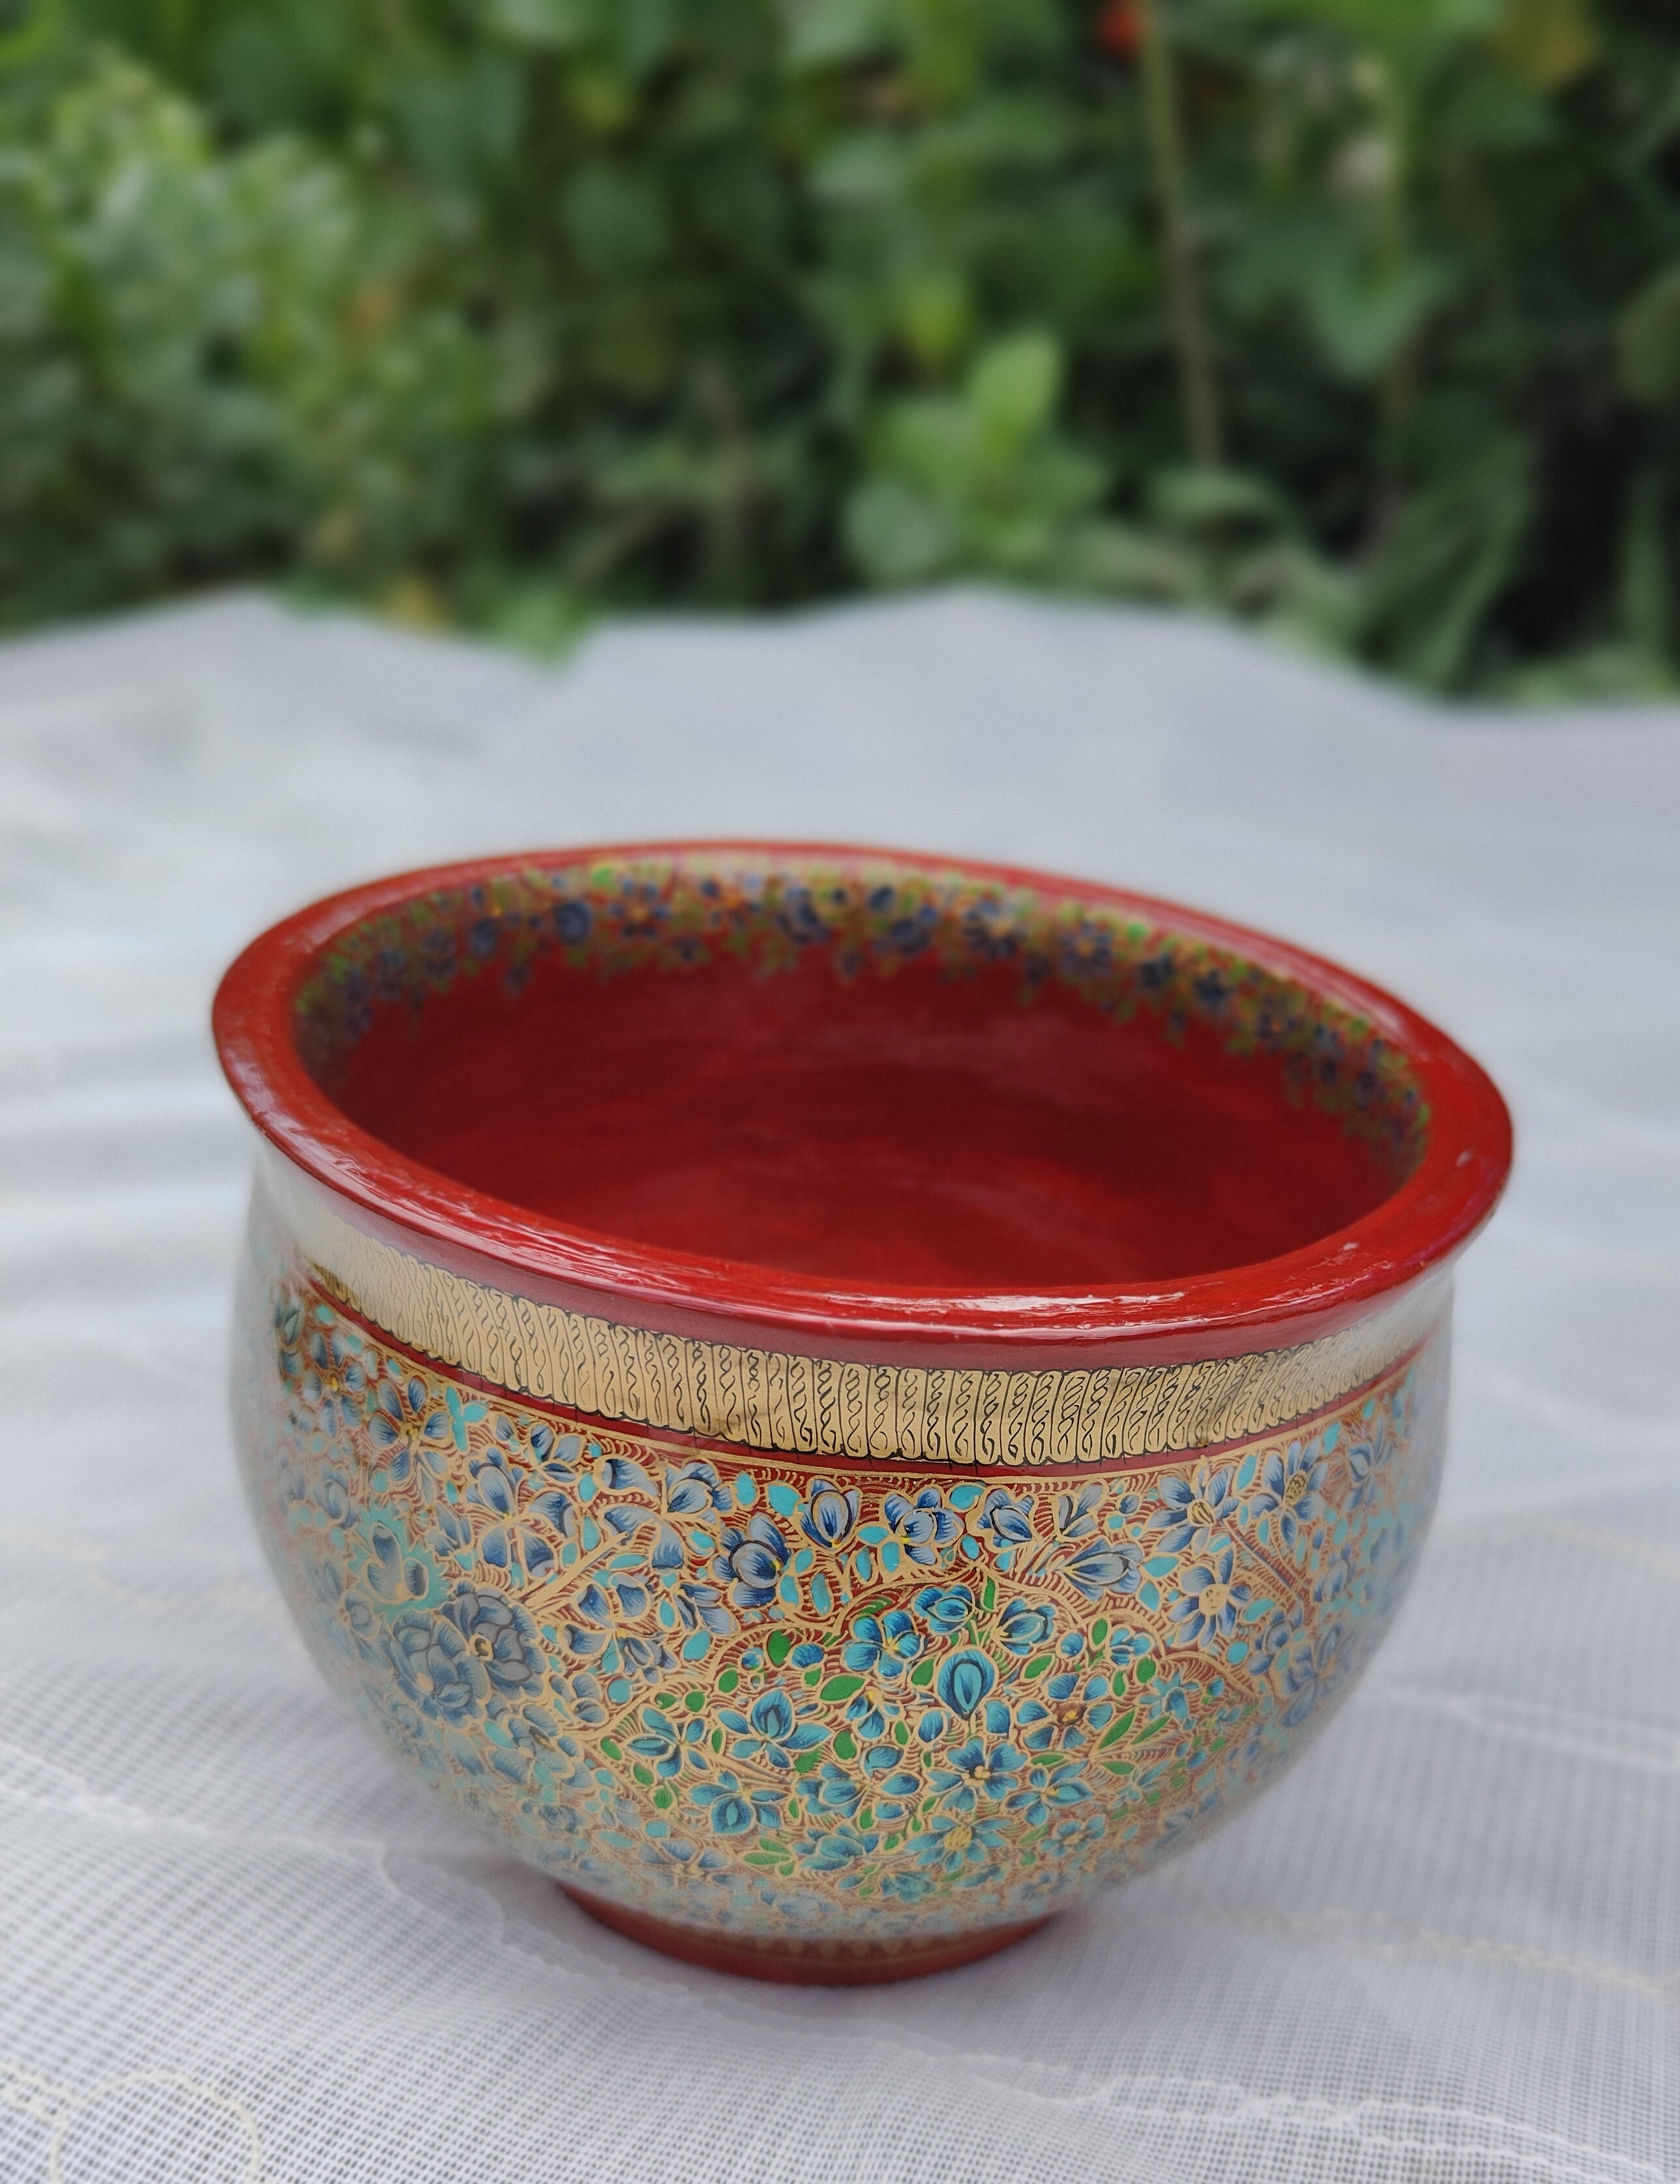 Sonth x Fayaz Ahmad Jan - Red And Turquoise Bowl